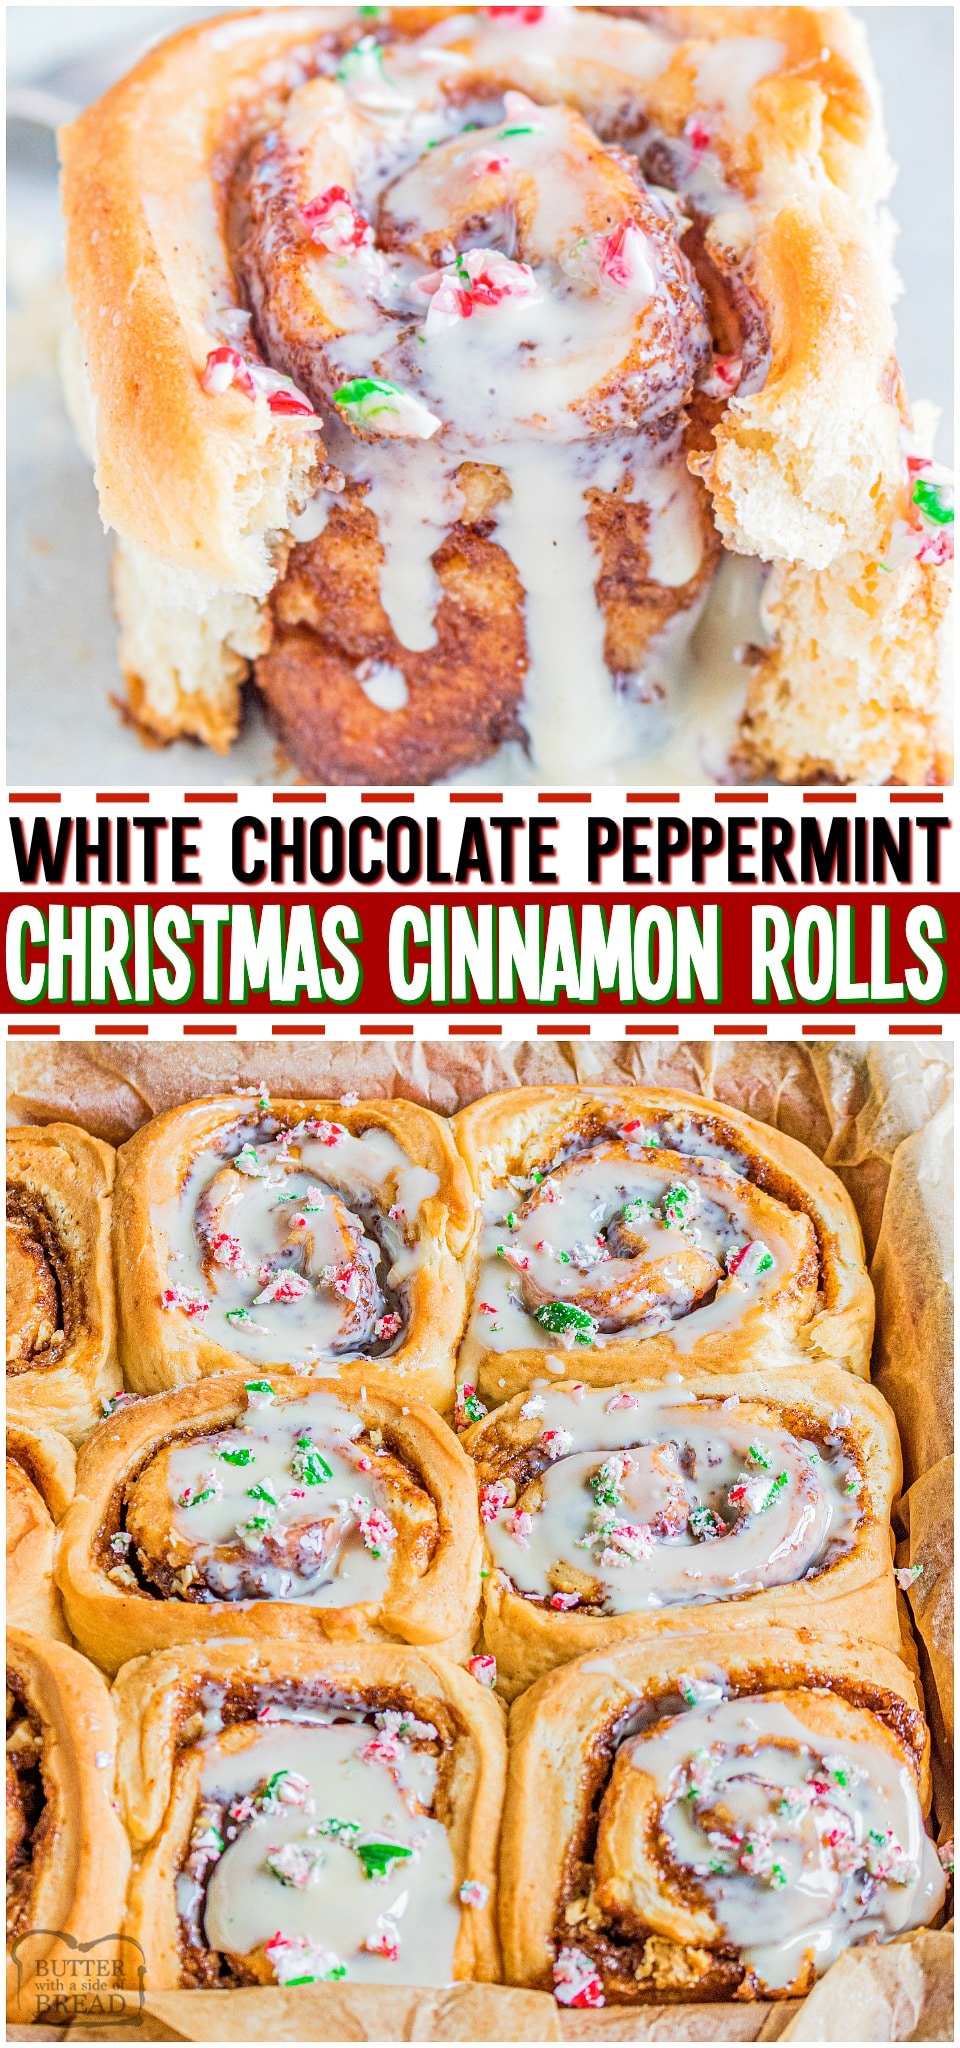 Christmas Cinnamon Rolls made with a cinnamon, white chocolate filling and topped with a simple peppermint vanilla glaze! Celebrate Christmas morning with this festive homemade Cinnamon Roll recipe! #Christmas #holidays #baking #breakfast #CinnamonRolls #Peppermint #easyrecipe from BUTTER WITH A SIDE OF BREAD